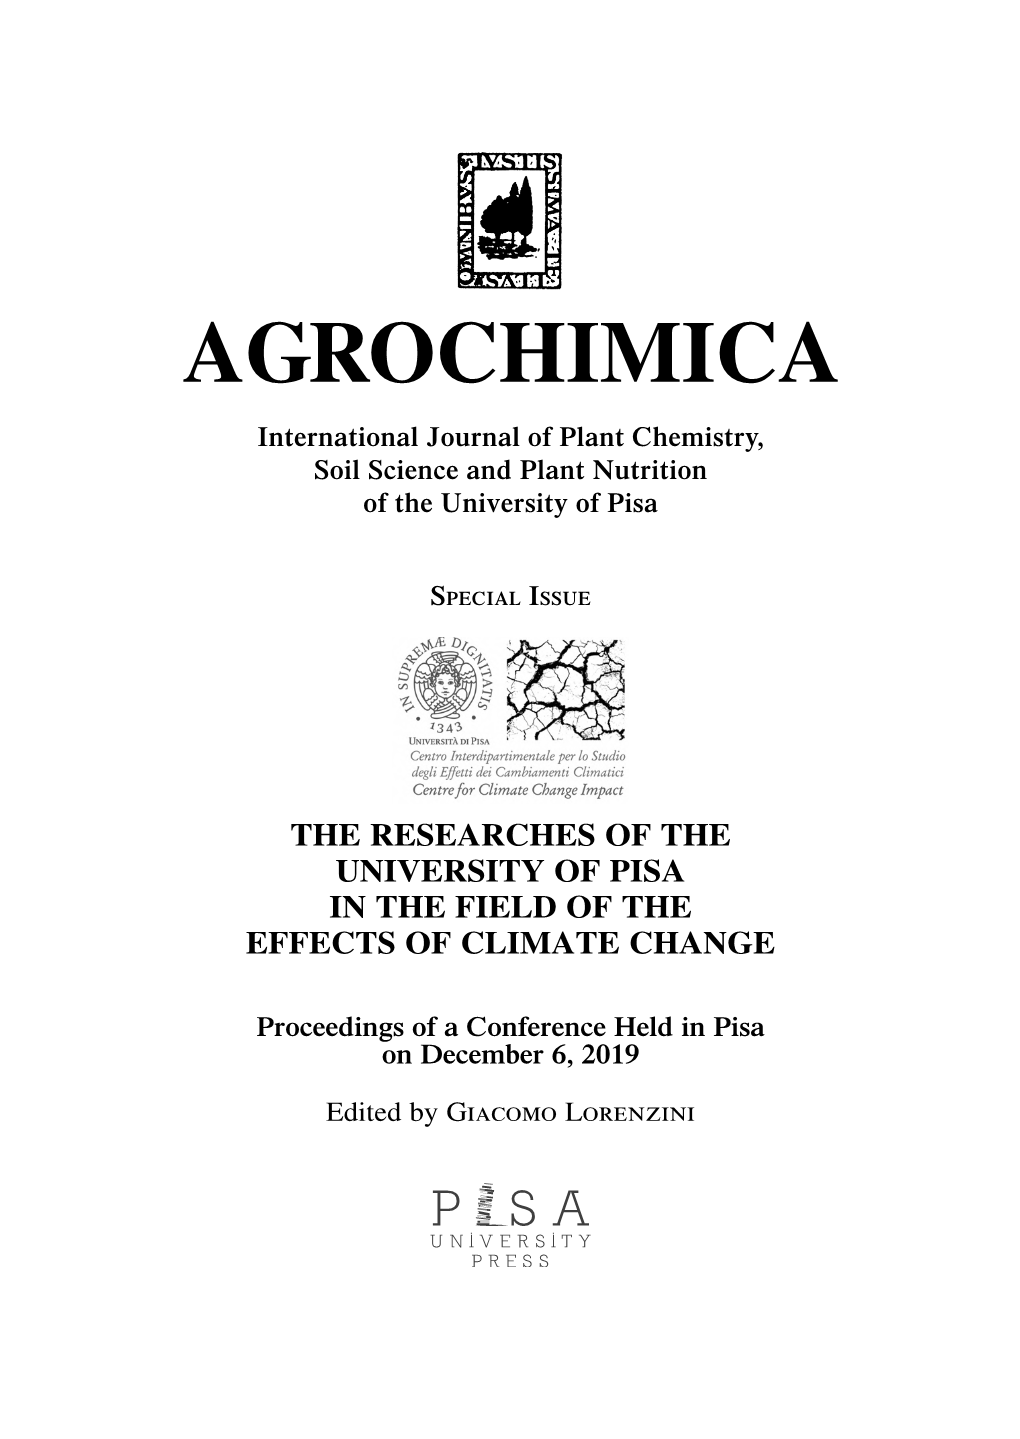 AGROCHIMICA International Journal of Plant Chemistry, Soil Science and Plant Nutrition of the University of Pisa